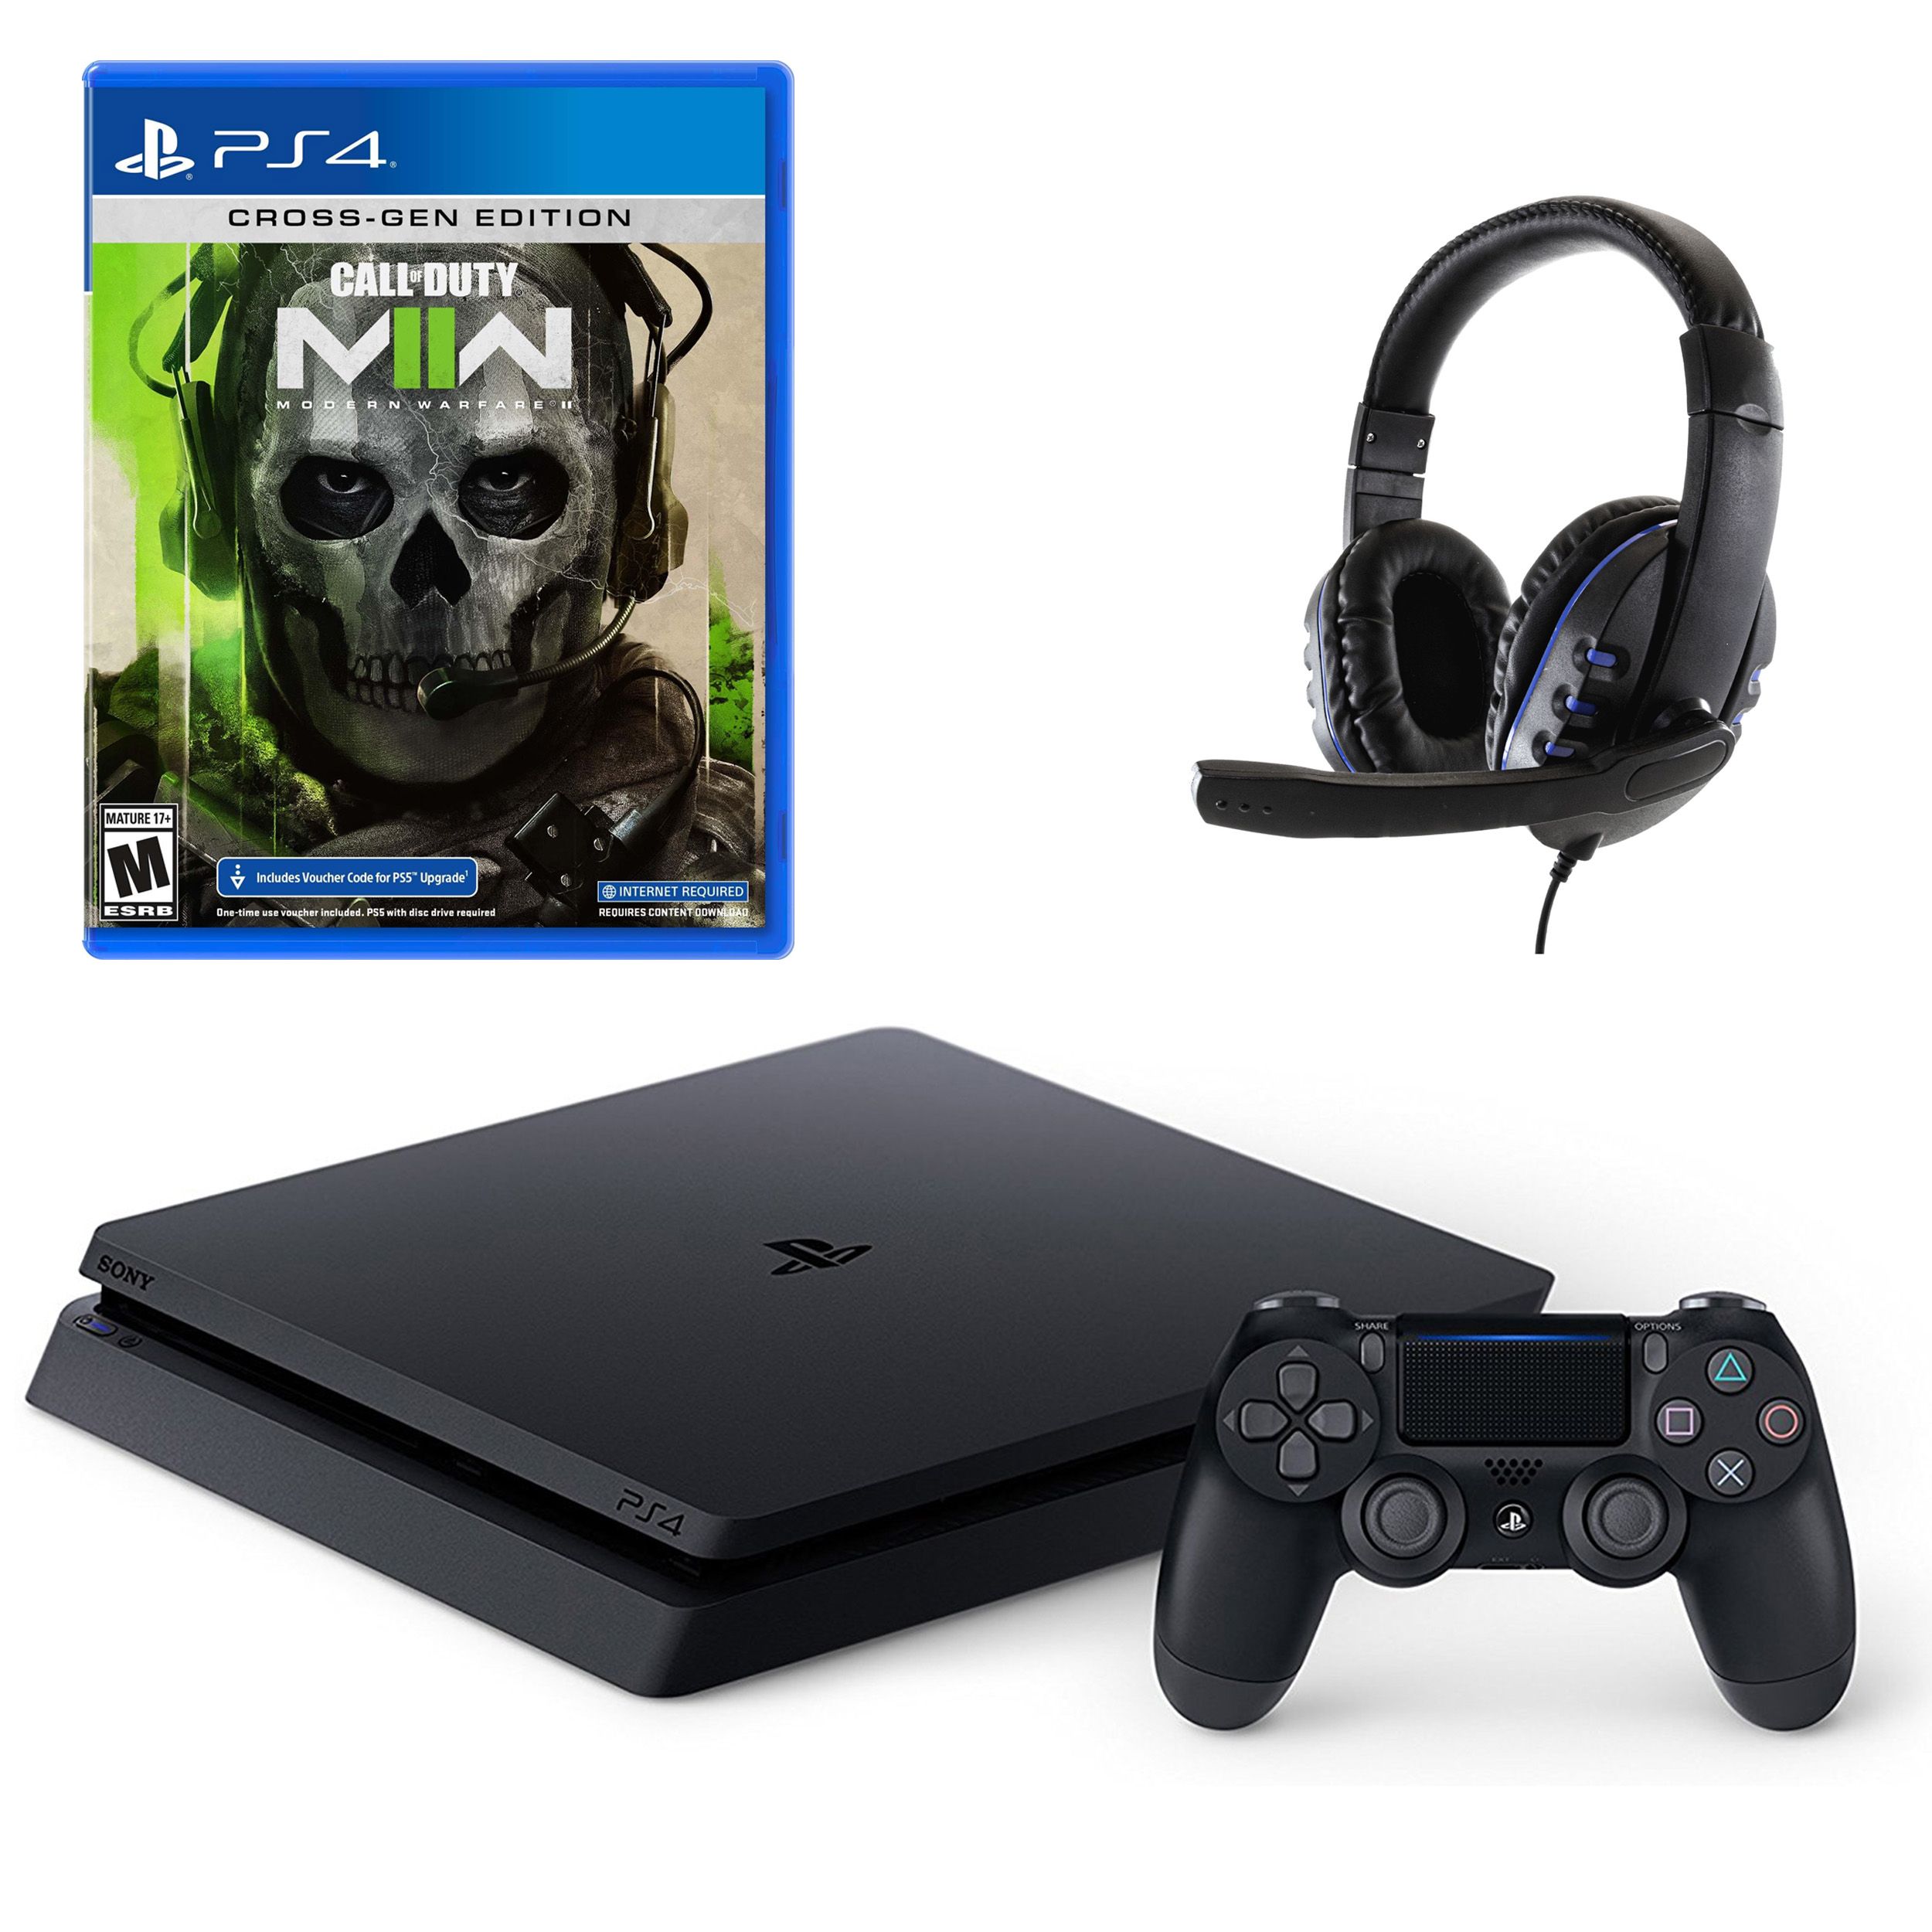 - Sony 1TB Console Bundle with Call of Duty: Modern Warfare II Digital Download and Wired Headset